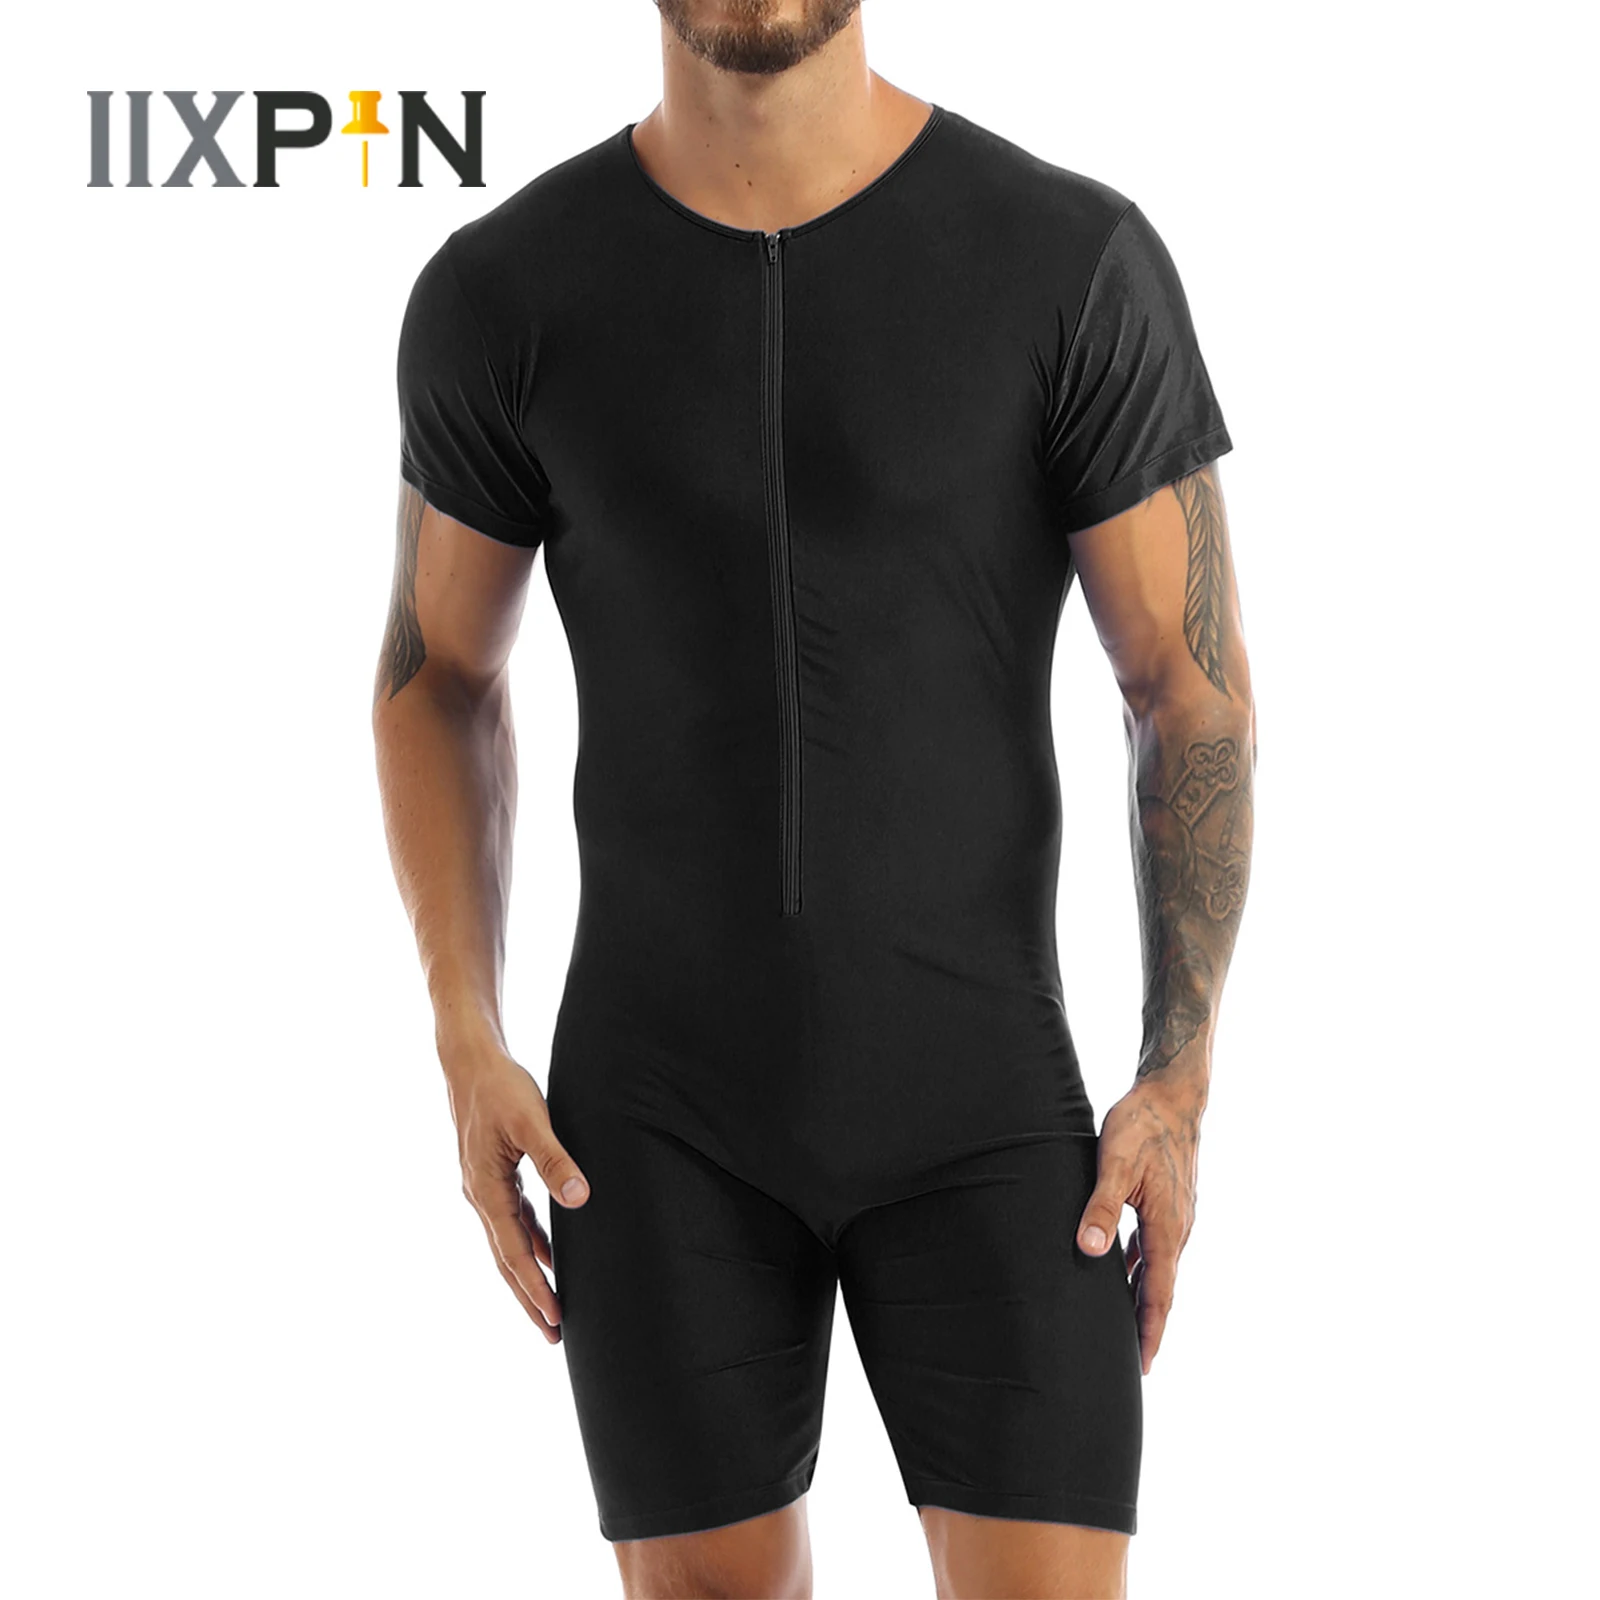 Mens Pajamas Undershirts One-piece Leotard Jumpsuit Male Short Sleeve Front Zipper Elastic Soft Boxer Briefs Bodysuit Swimwear mens striped wrestling singlet bodysuit weight lifting stretchy leotard fitness outfits athletic jumpsuit male body shapers